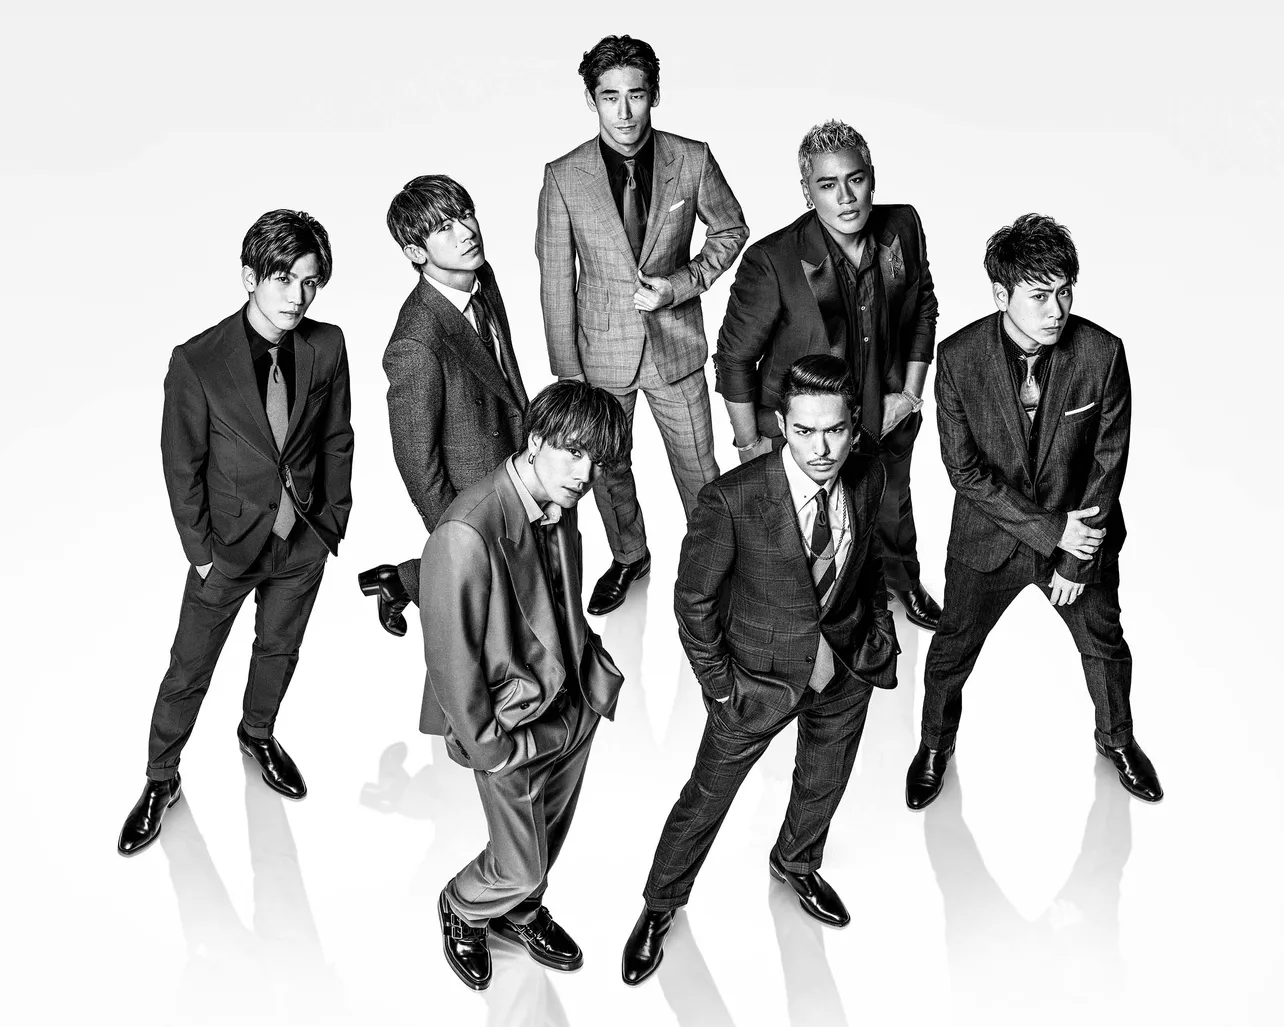 「FNSうたの夏まつり」への出演が決まった三代目 J SOUL BROTHERS from EXILE TRIBE